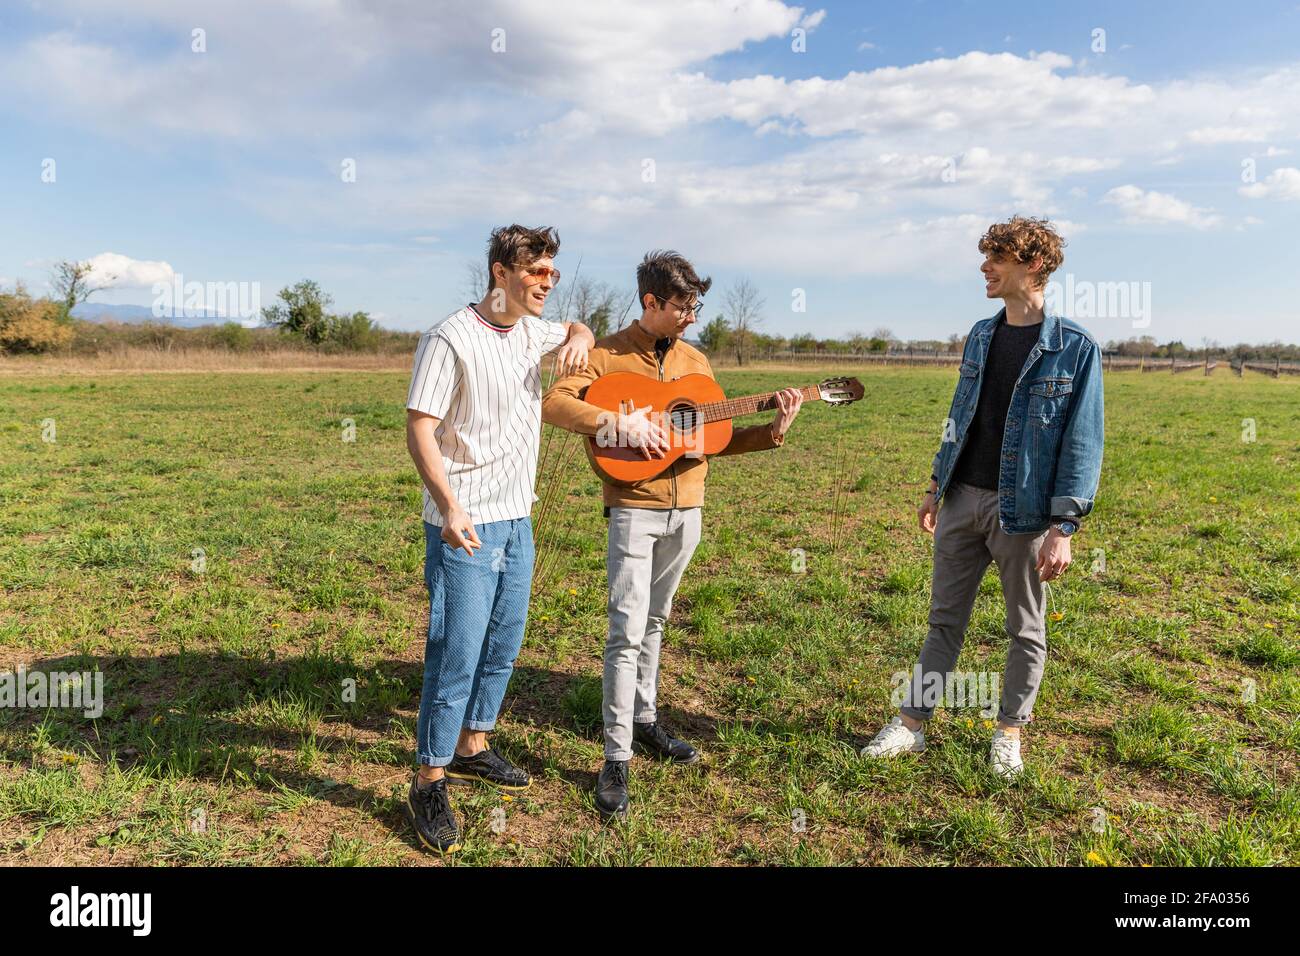 three friends in a field meet to sing and play guitar cheerfully together. Stock Photo